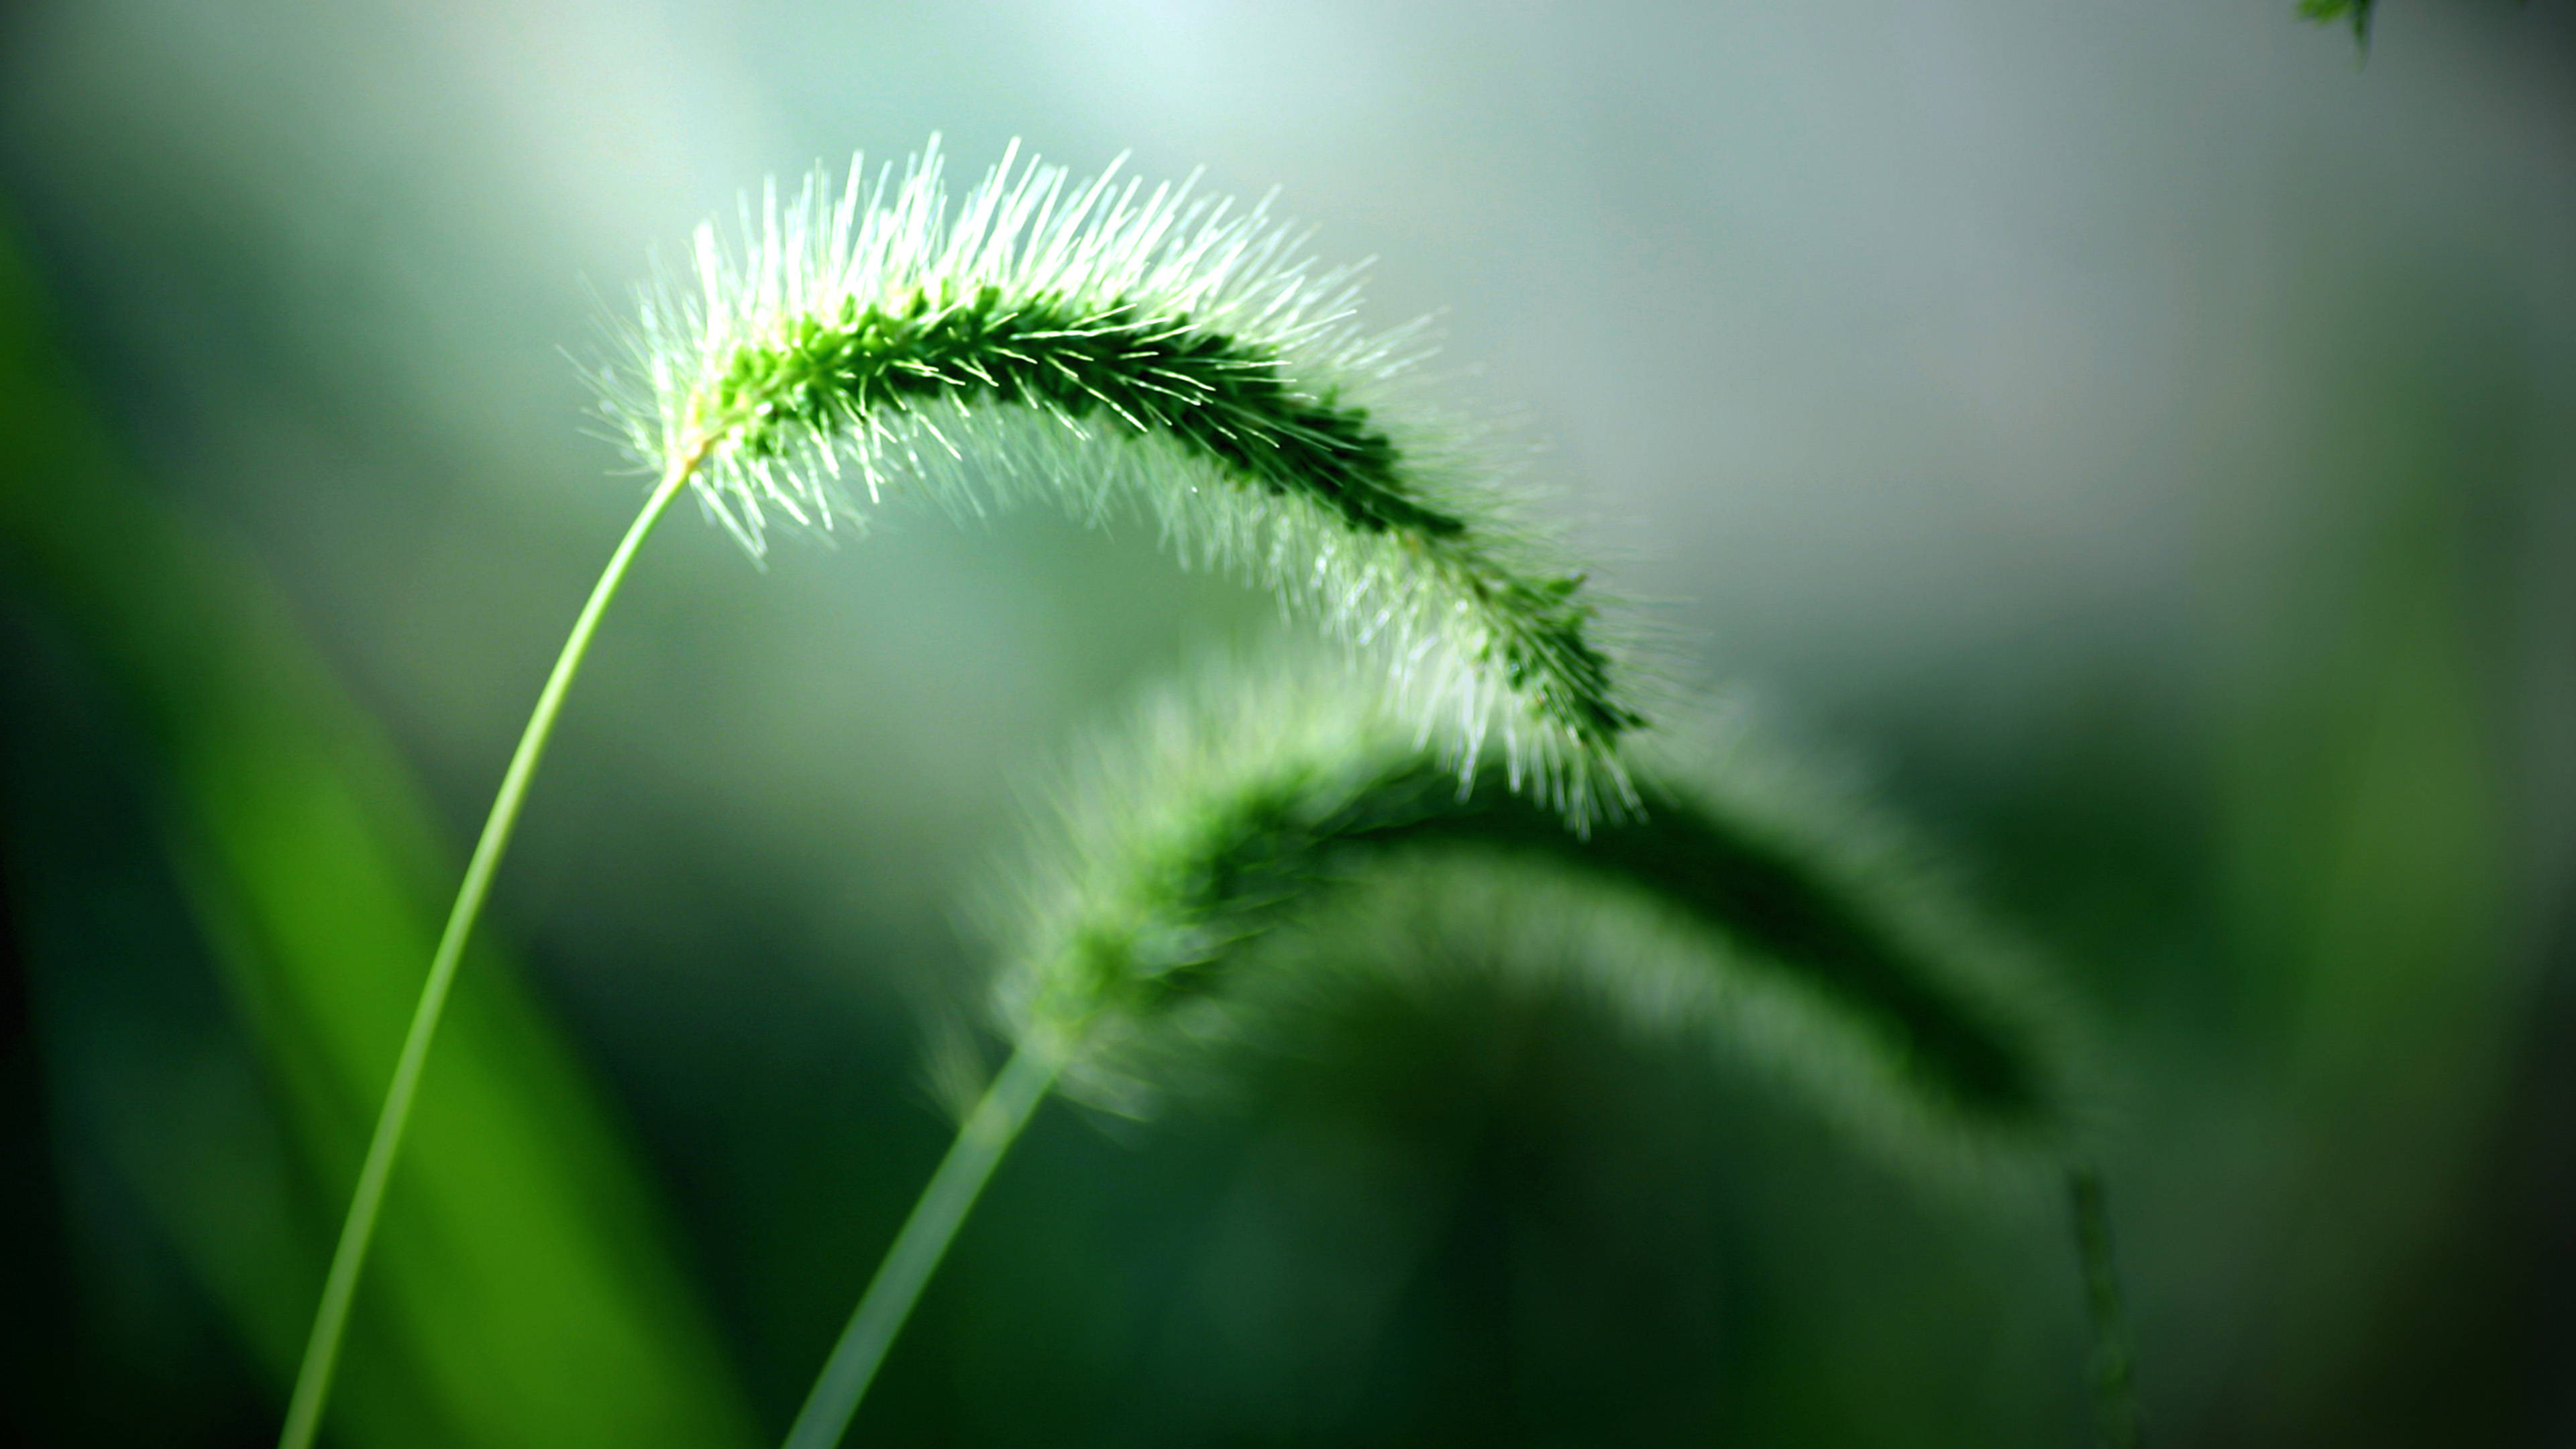 Stunning 4k Green Foxtail Plant Image Background